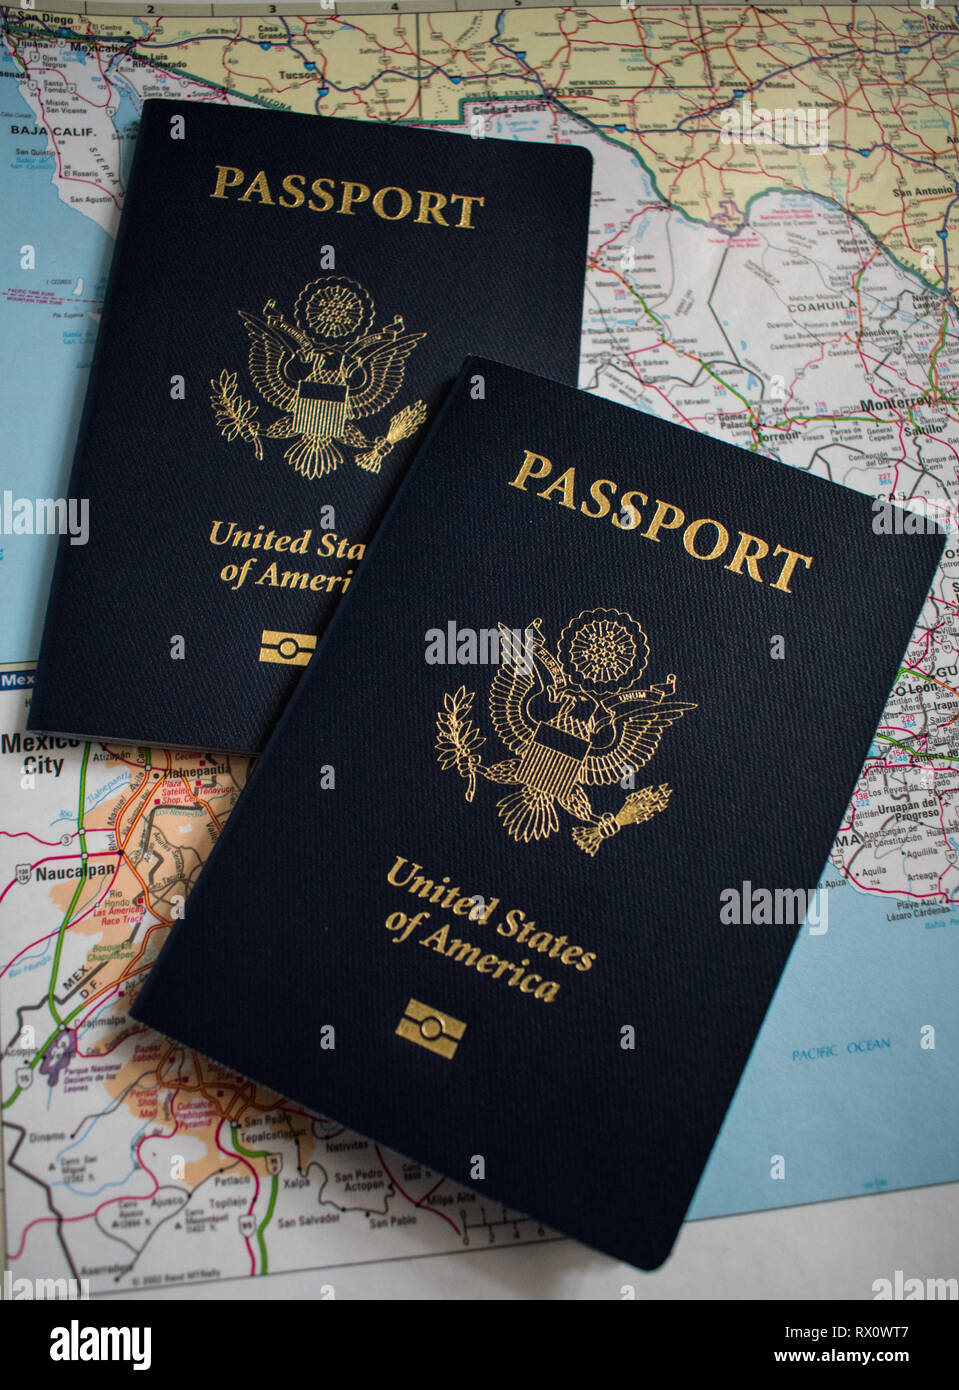 Two US passports on a map background Stock Photo